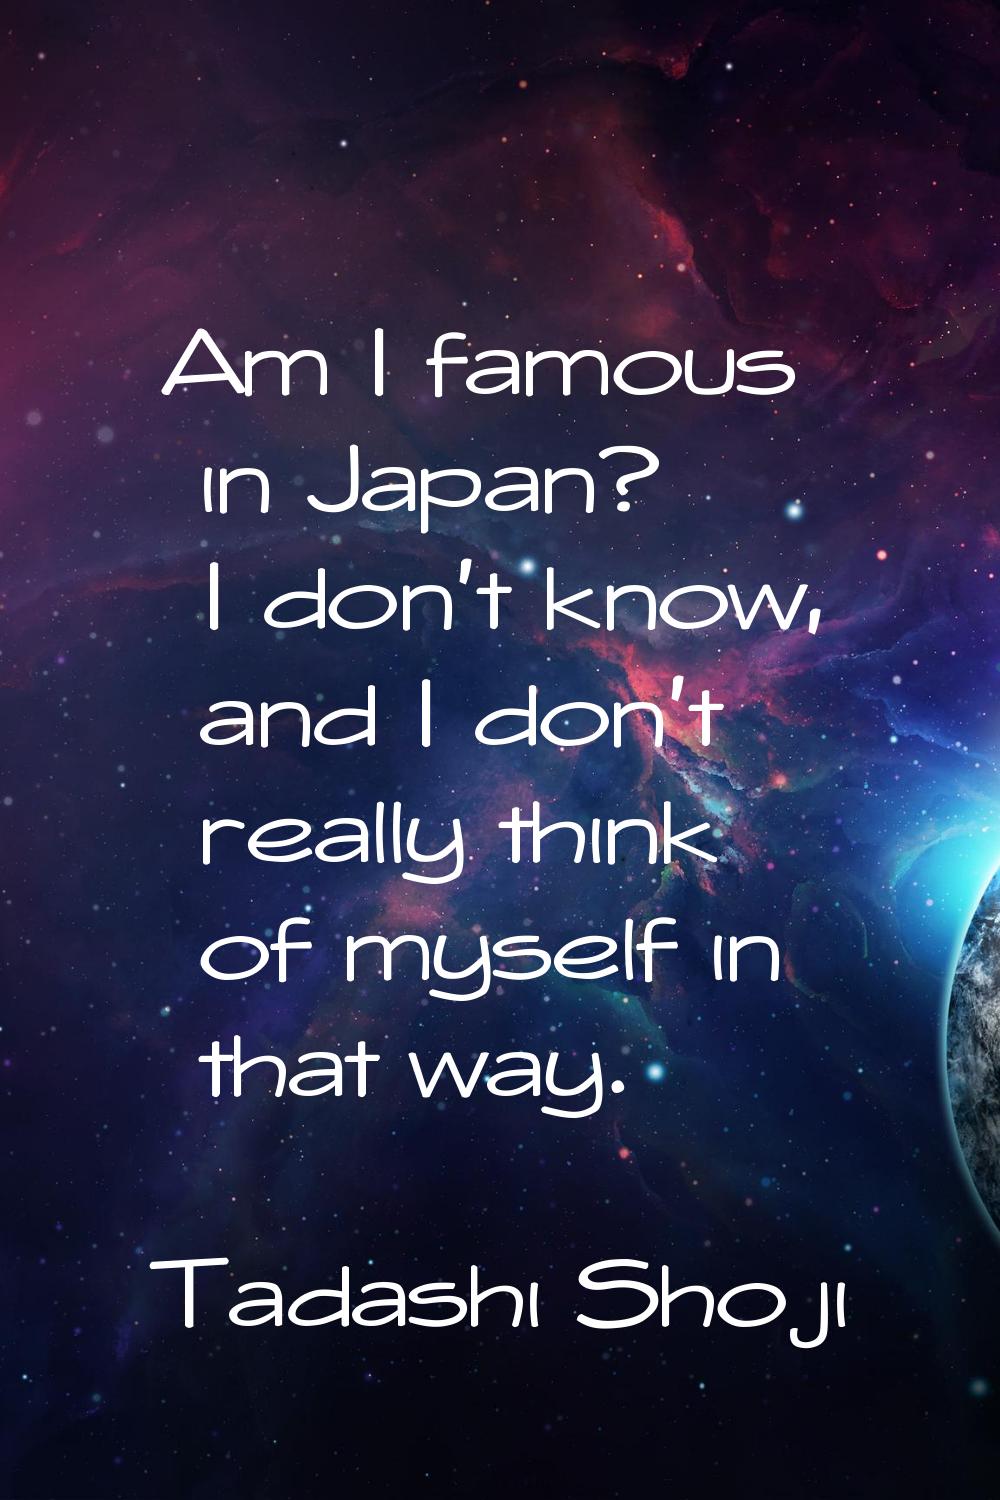 Am I famous in Japan? I don't know, and I don't really think of myself in that way.